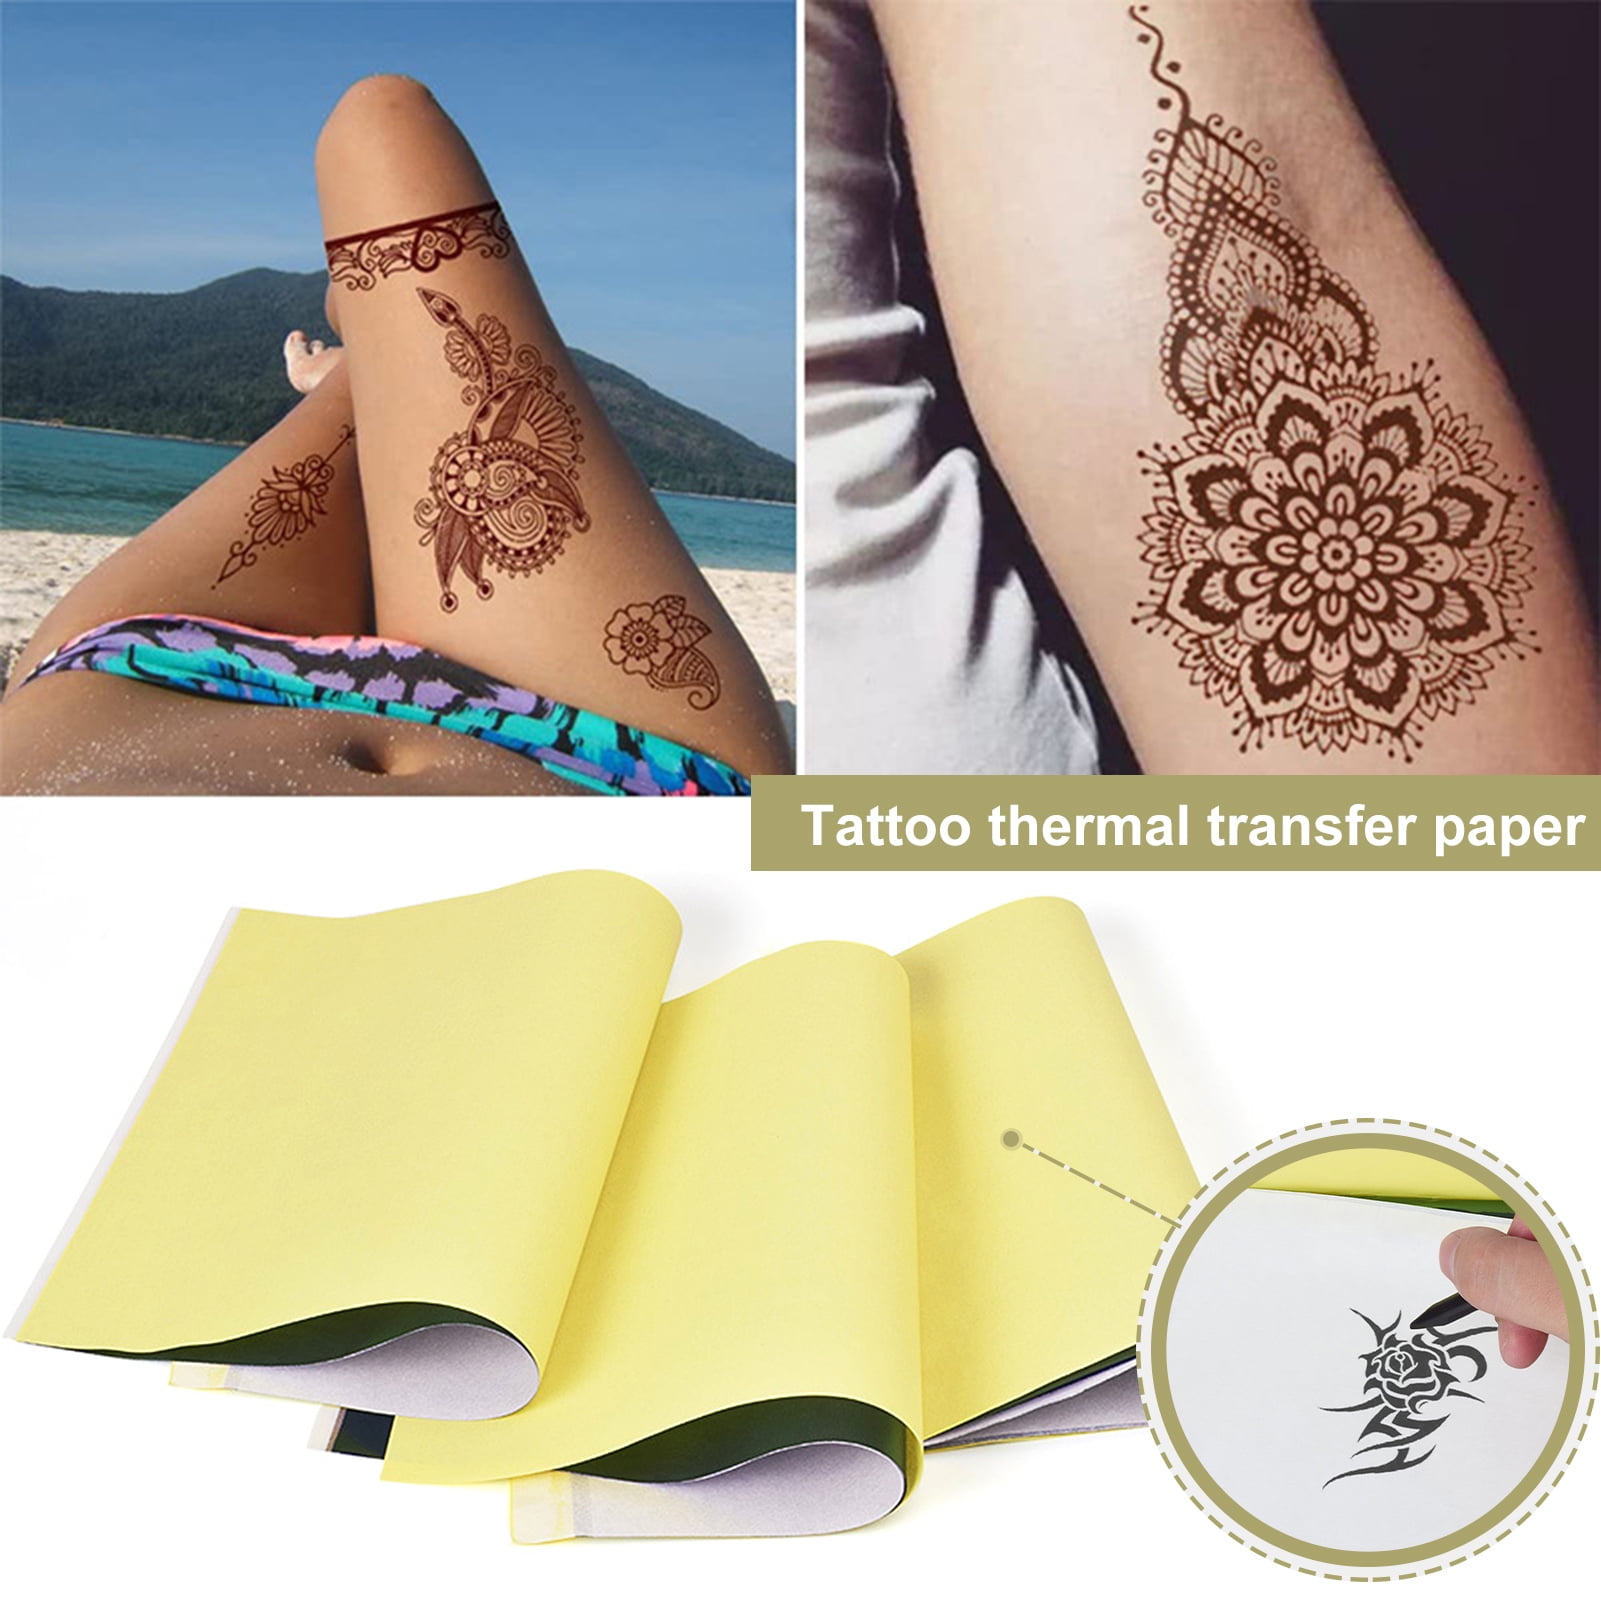 Zruodwans 1 Pack Tattoo Transfer Paper for Tattooing to skin, Tattoo  Stencil Paper for Tattooing Thermal Stencil Diy, A4 Size